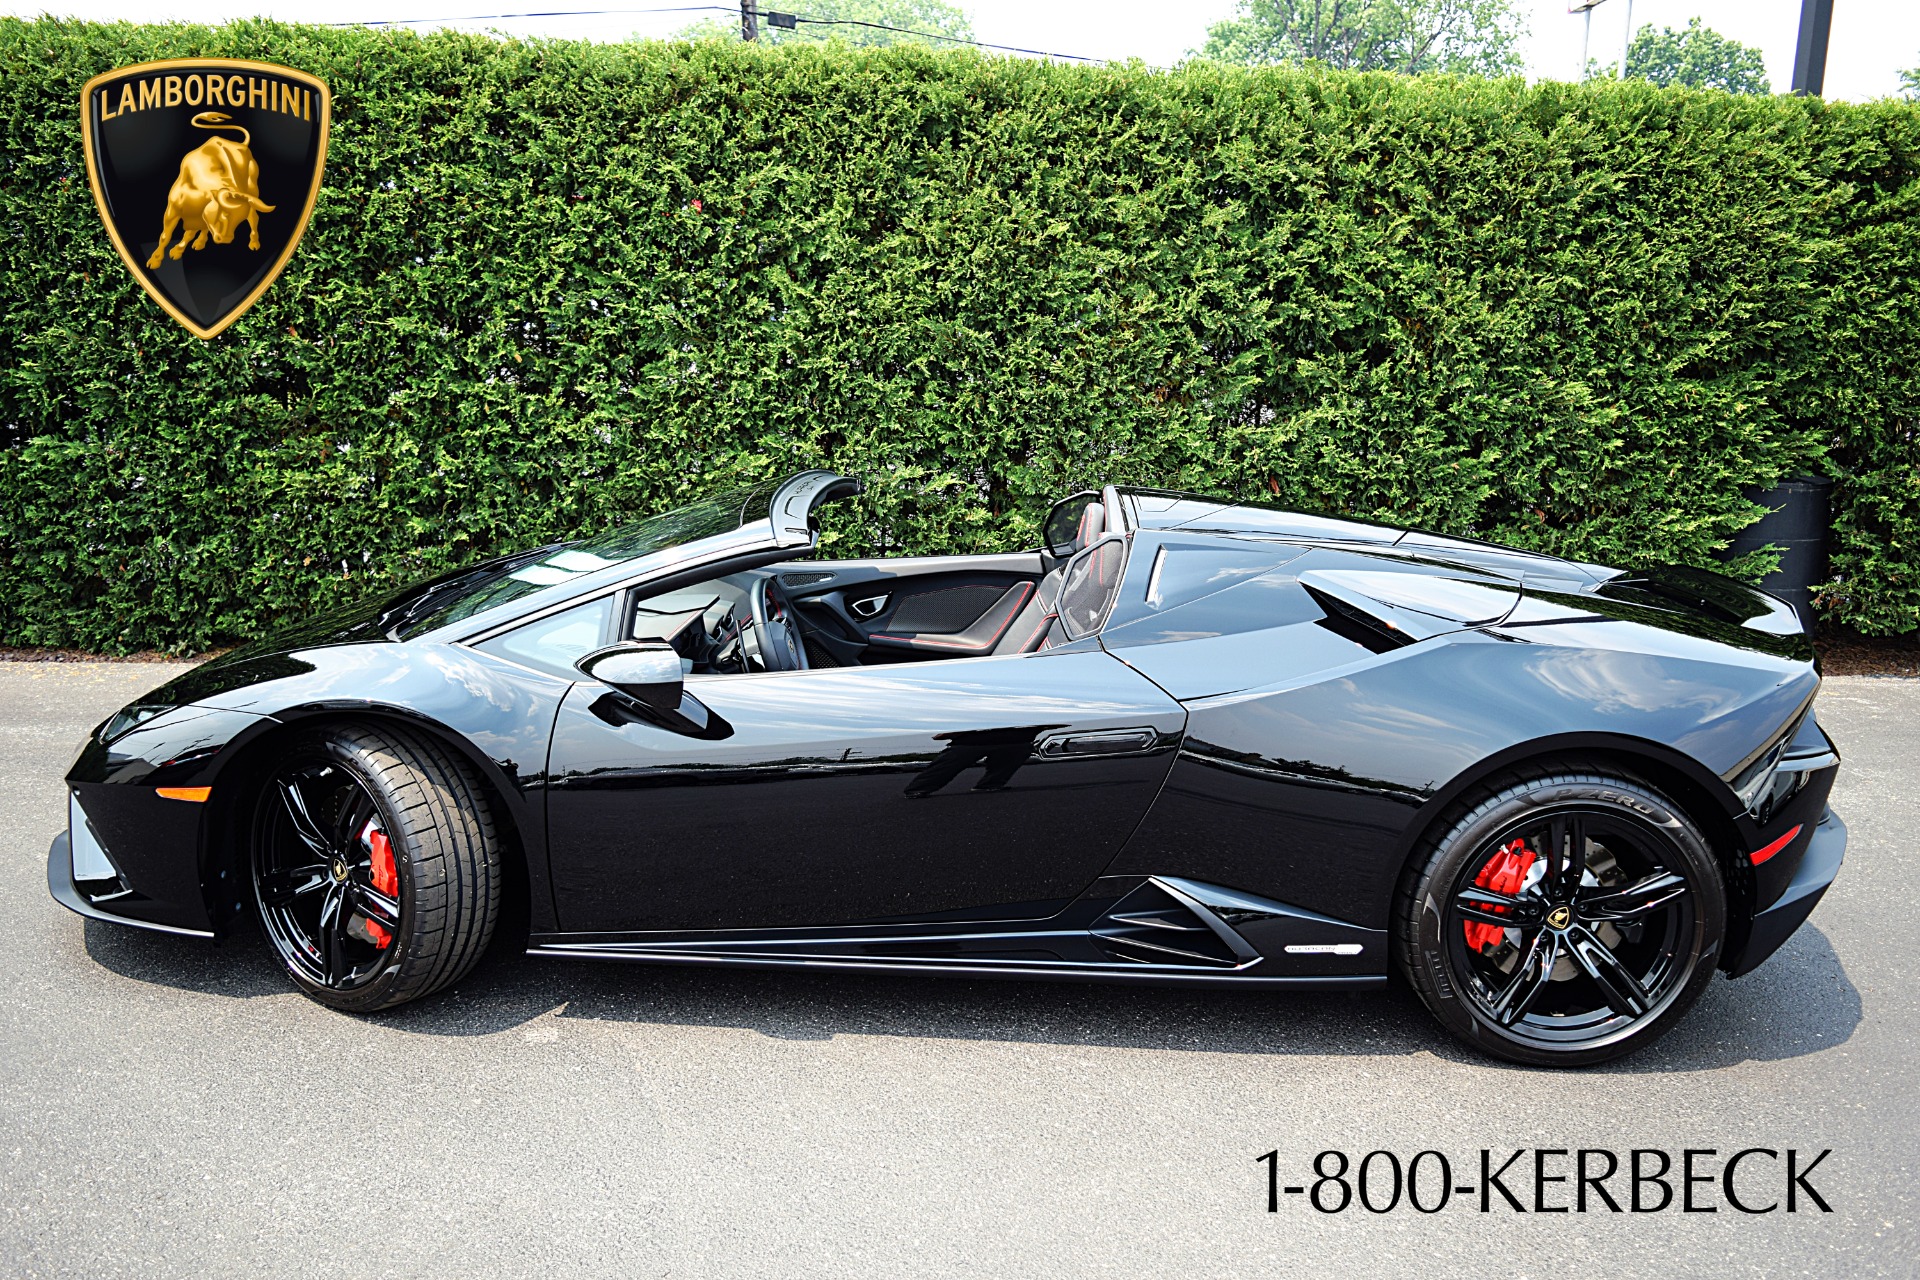 Used 2020 Lamborghini Huracan LP-610-2 EVO Spyder / LEASE OPTIONS AVAILABLE for sale $309,000 at Bentley Palmyra N.J. in Palmyra NJ 08065 2